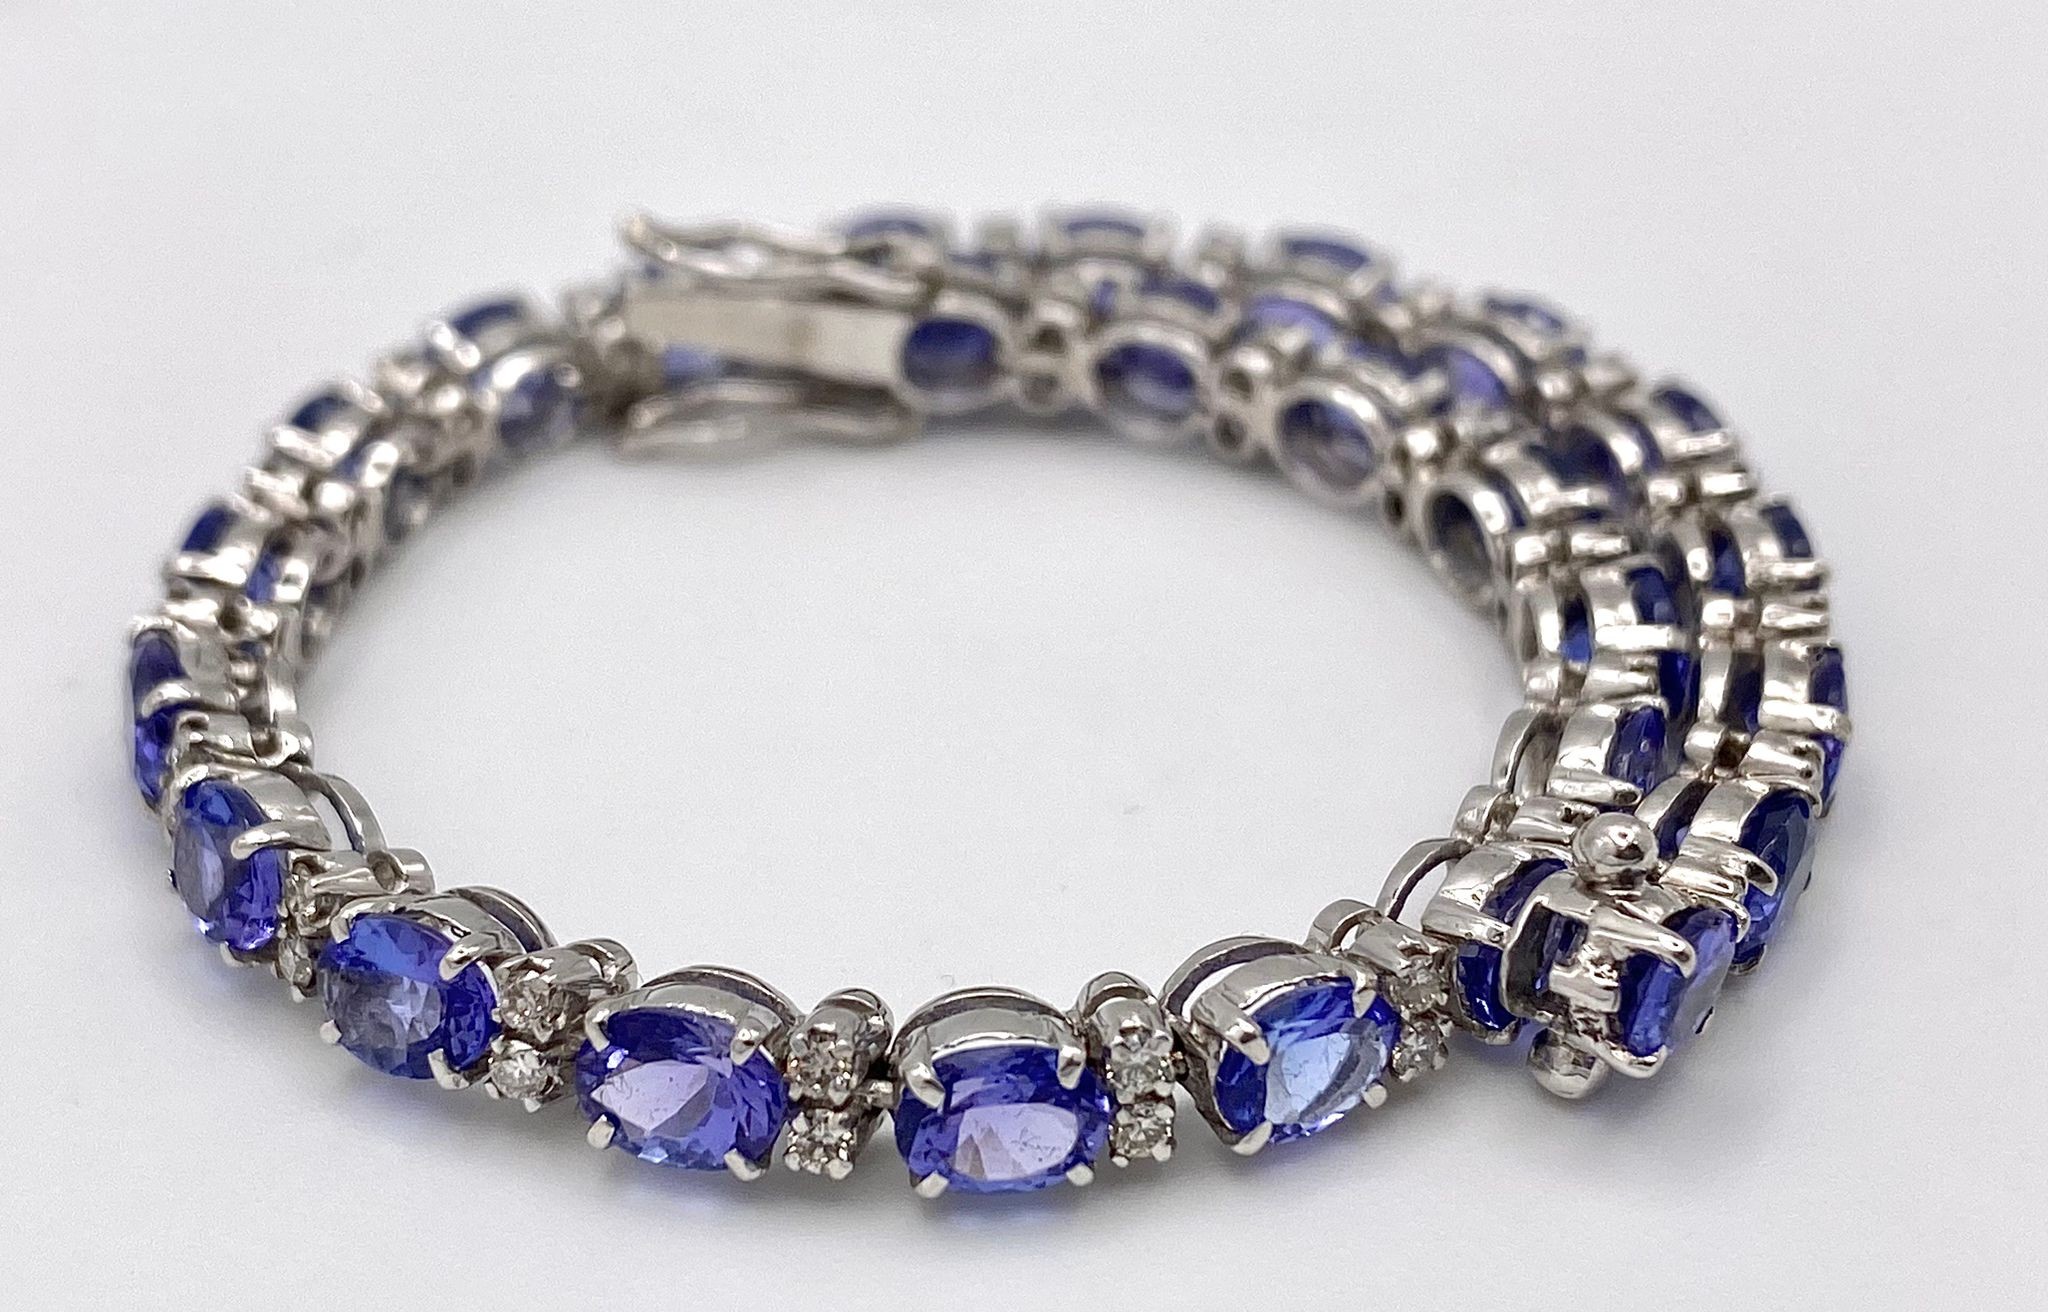 A spectacular 18 K white gold bracelet with oval cut tanzanite gems and round cut diamonds. - Image 4 of 16